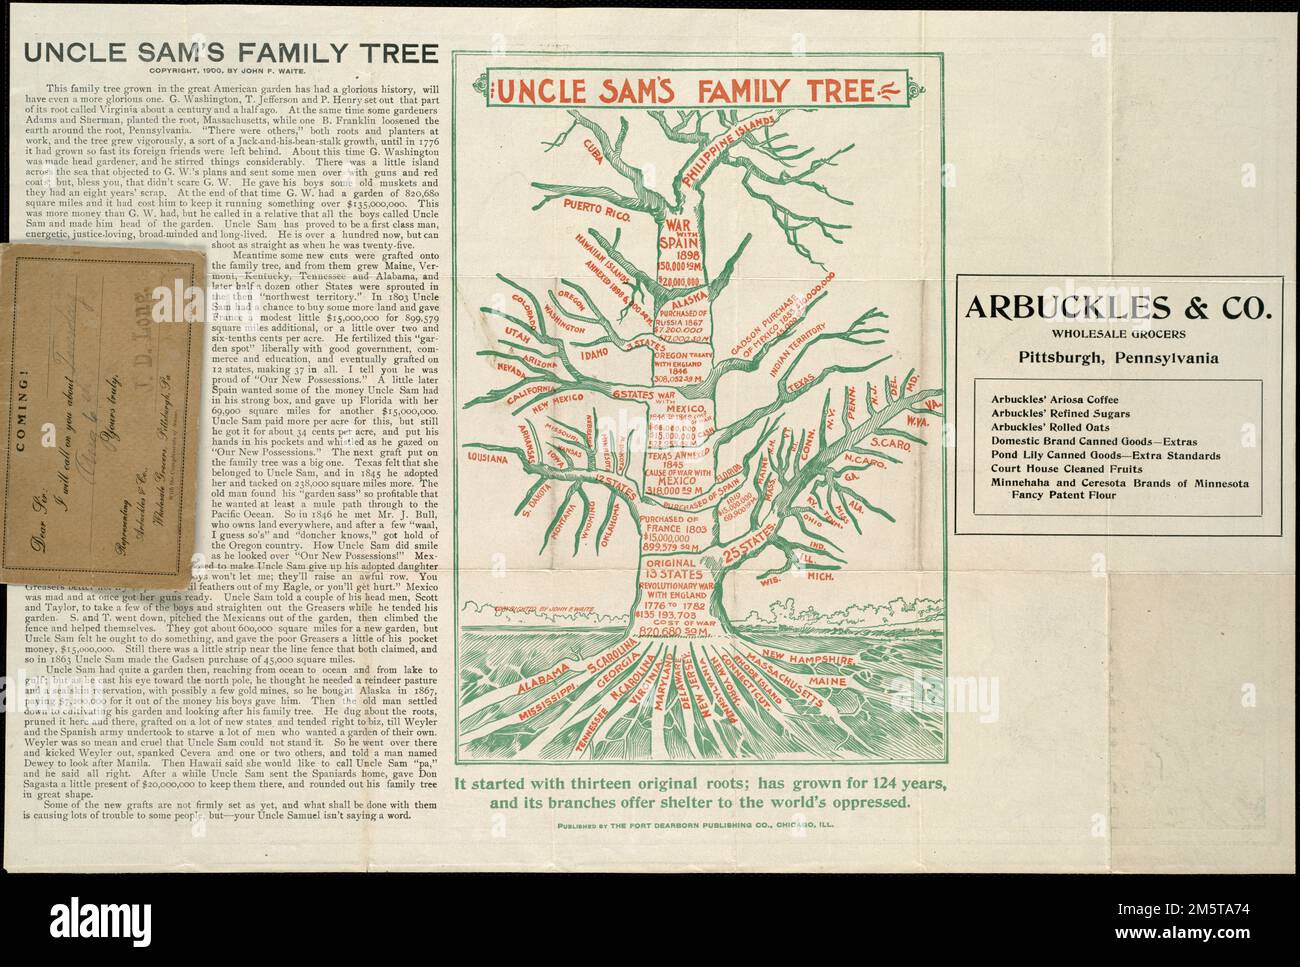 Uncle Sam's family tree.. Created as an advertisement for Arbuckles, a wholesale grocer, the territorial growth of the United States is compared to an orchard tree. Printed on the verso of a United States map, this unusual graphic is essentially a geographical time line, charting the chronological growth of the nation. In representing the United States, the cartographer uses a tree that sits in “the great American garden” and is tended by the mythical figure Uncle Sam. The roots symbolize the original thirteen colonies, while subsequent “grafts” and branches represent other states added by war Stock Photo